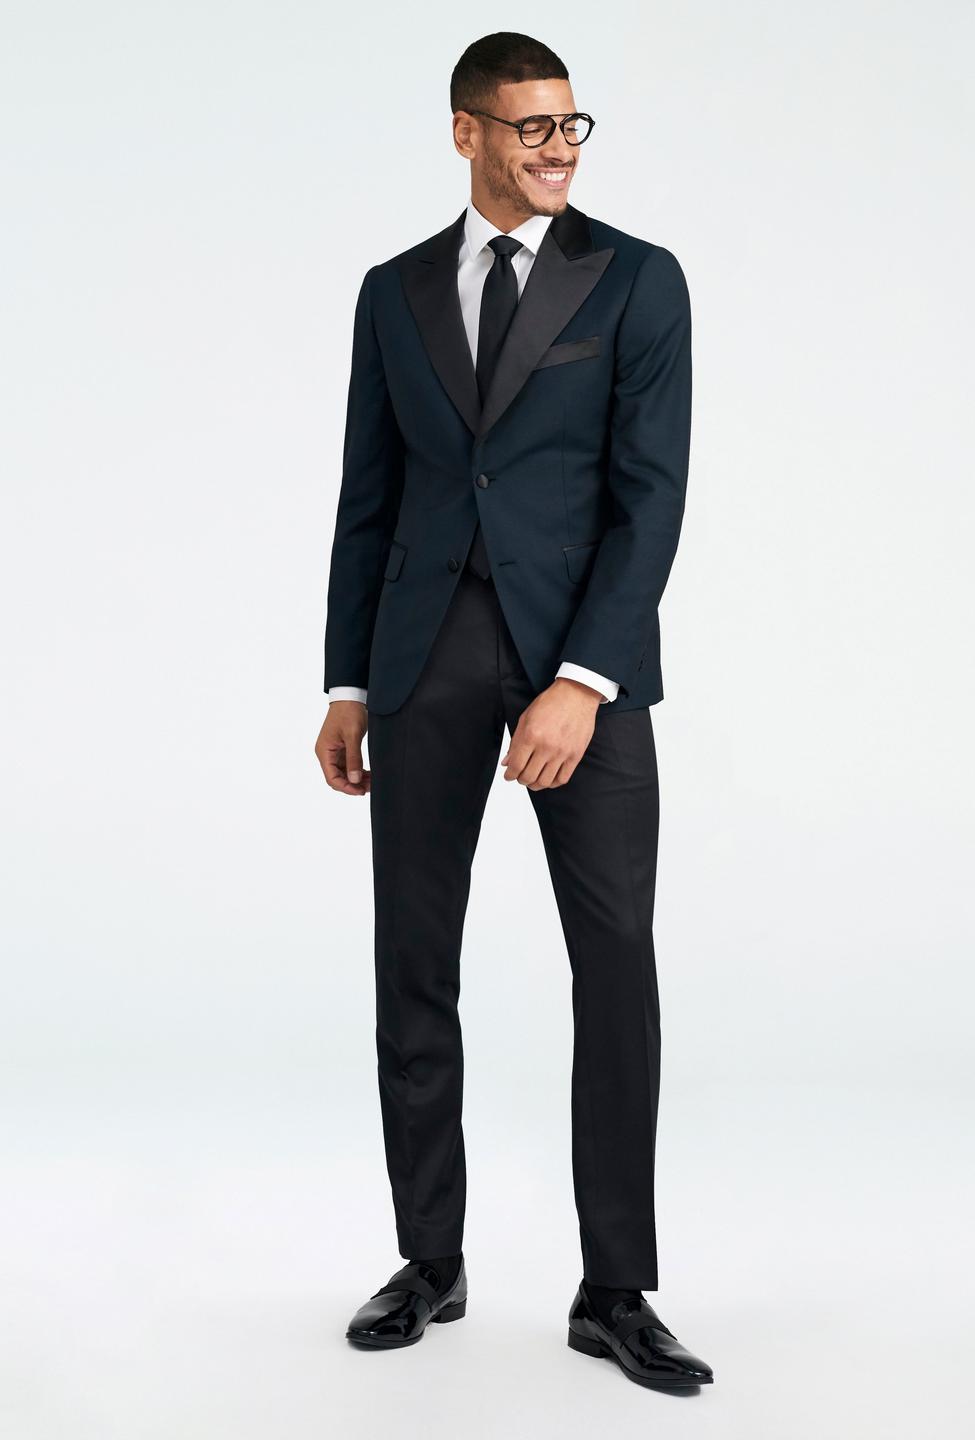 Teal blazer - Highworth Solid Design from Tuxedo Indochino Collection